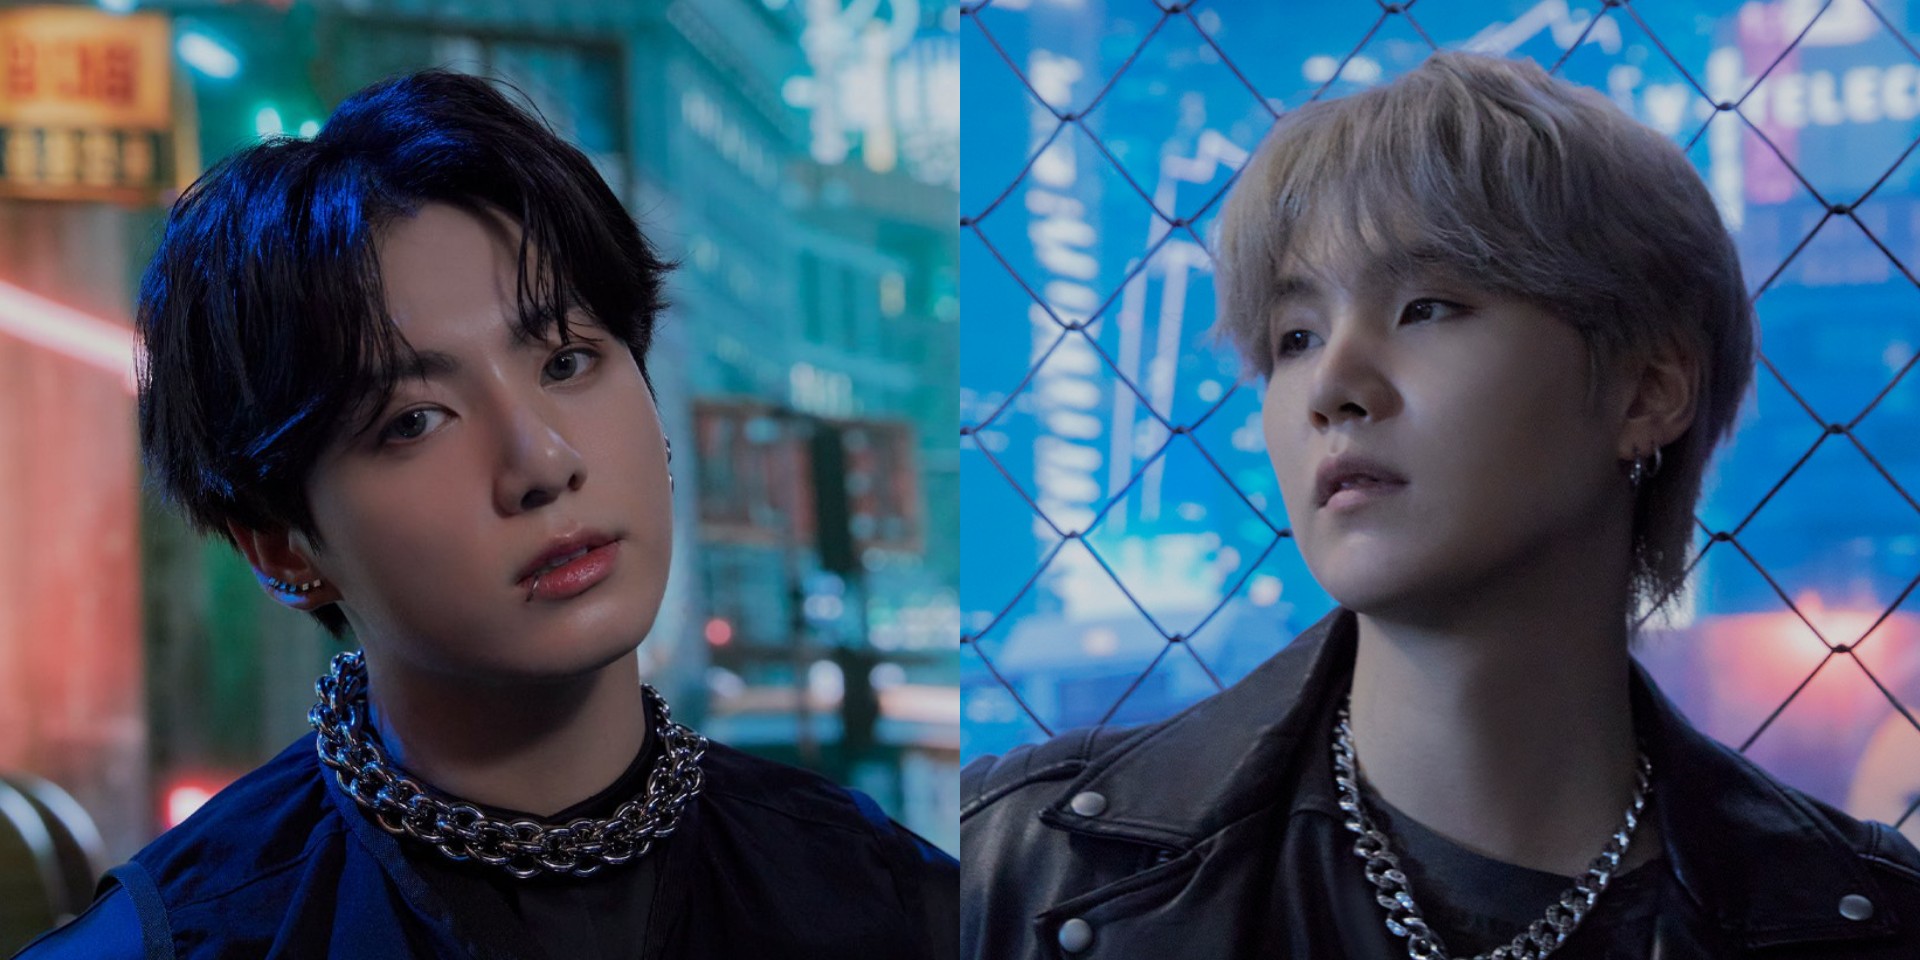 Get to know the co-writers of 'Stay Alive' by BTS' Jungkook and SUGA